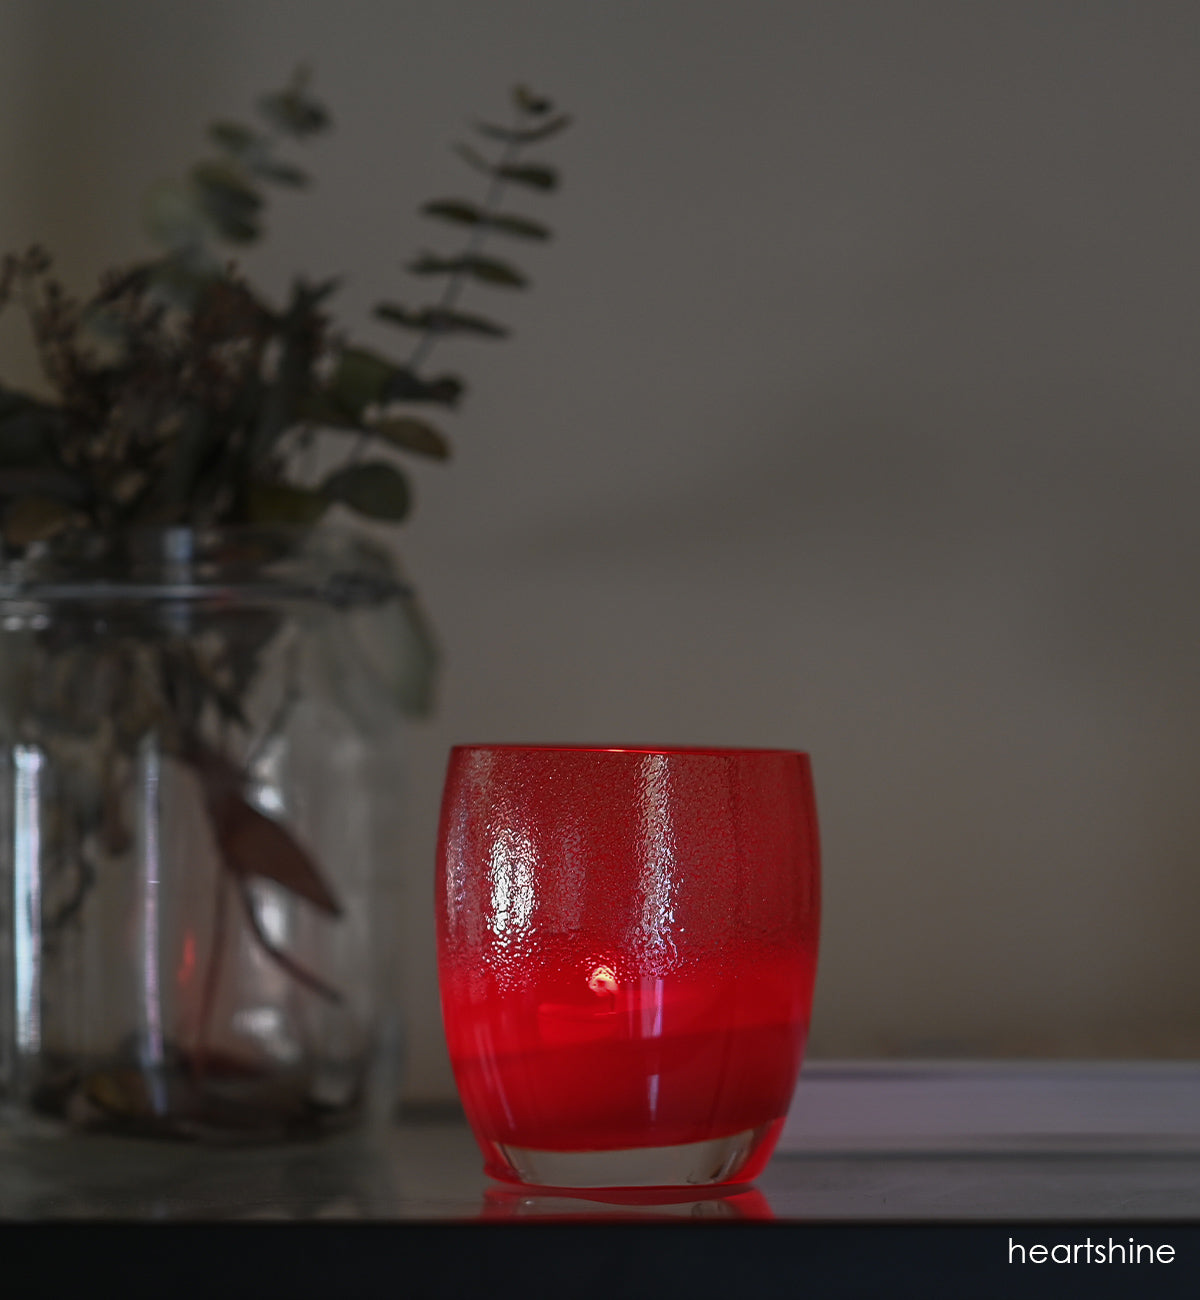 heartshine has a shimmering glitter that enrobes the top of a bright red base on this beautiful hand-blown candle holder.